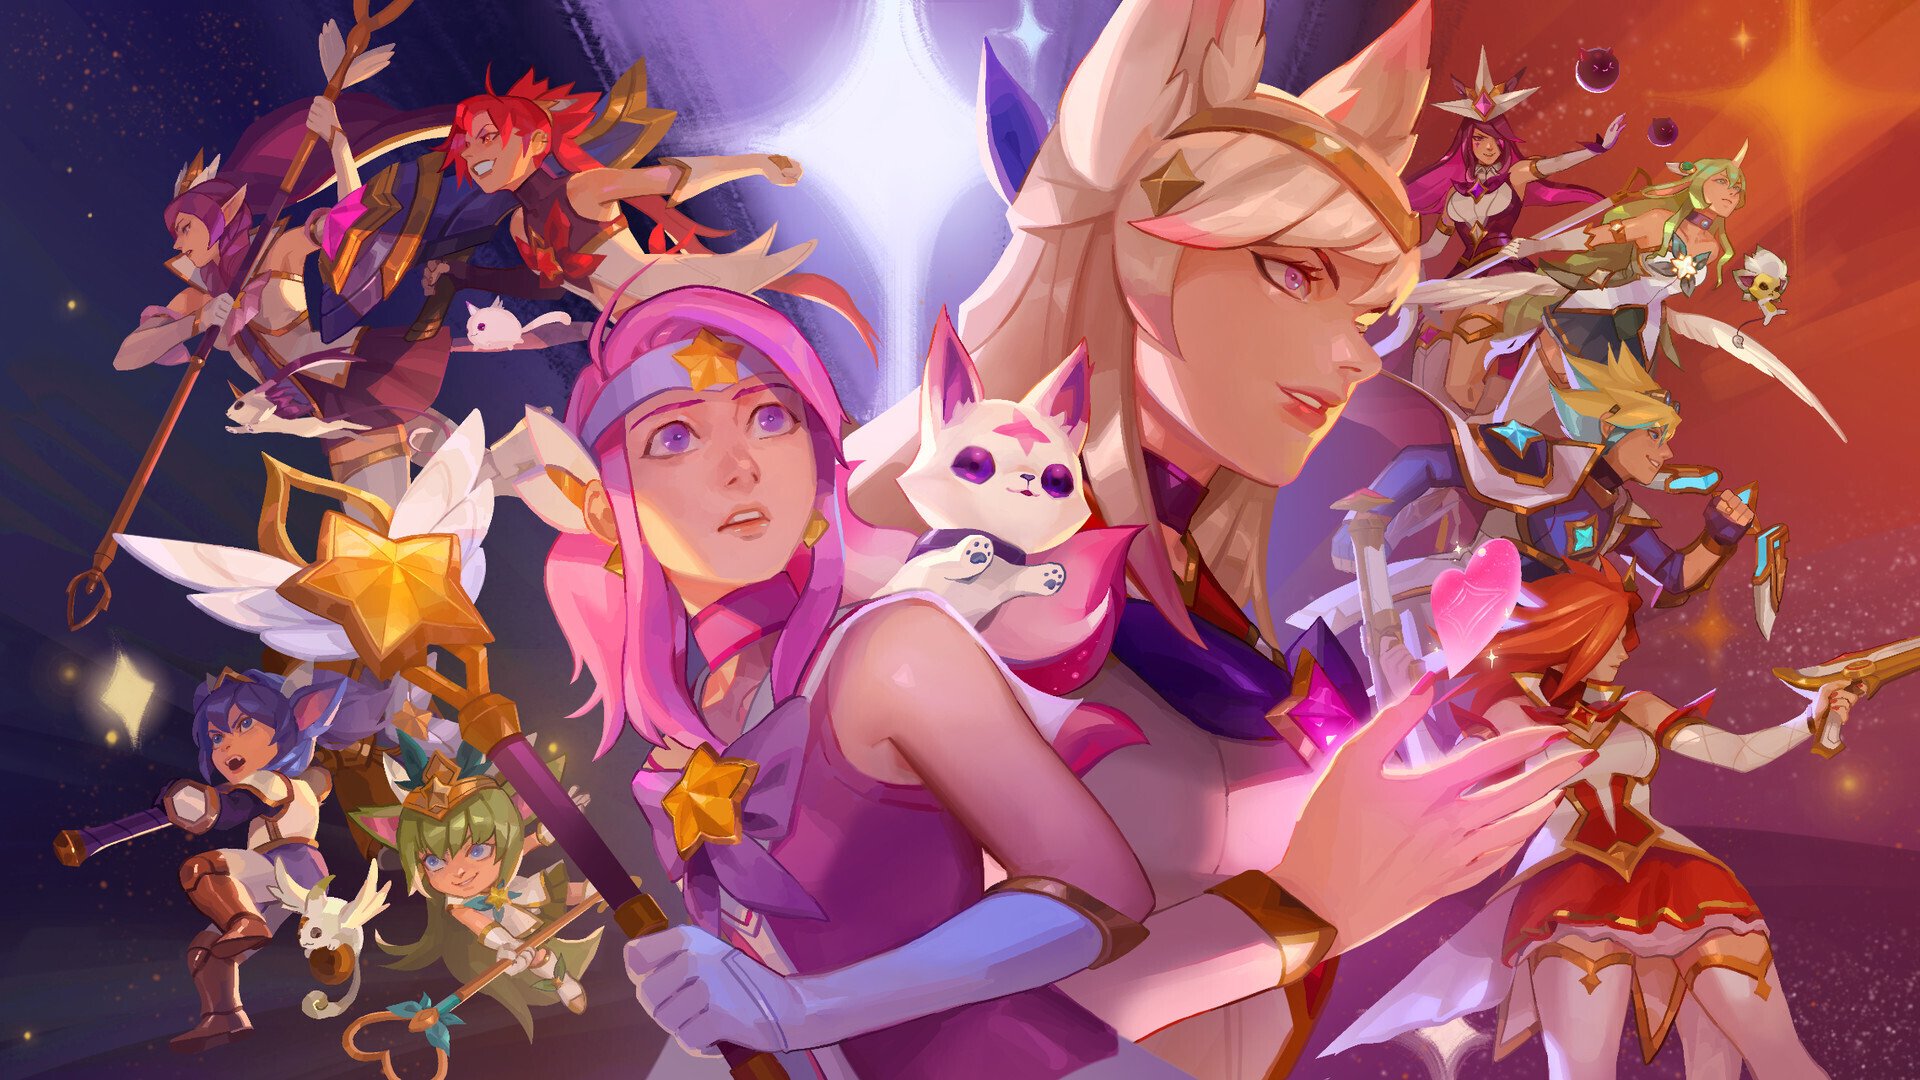 Star Guardians head to Anime Expo - League of Legends